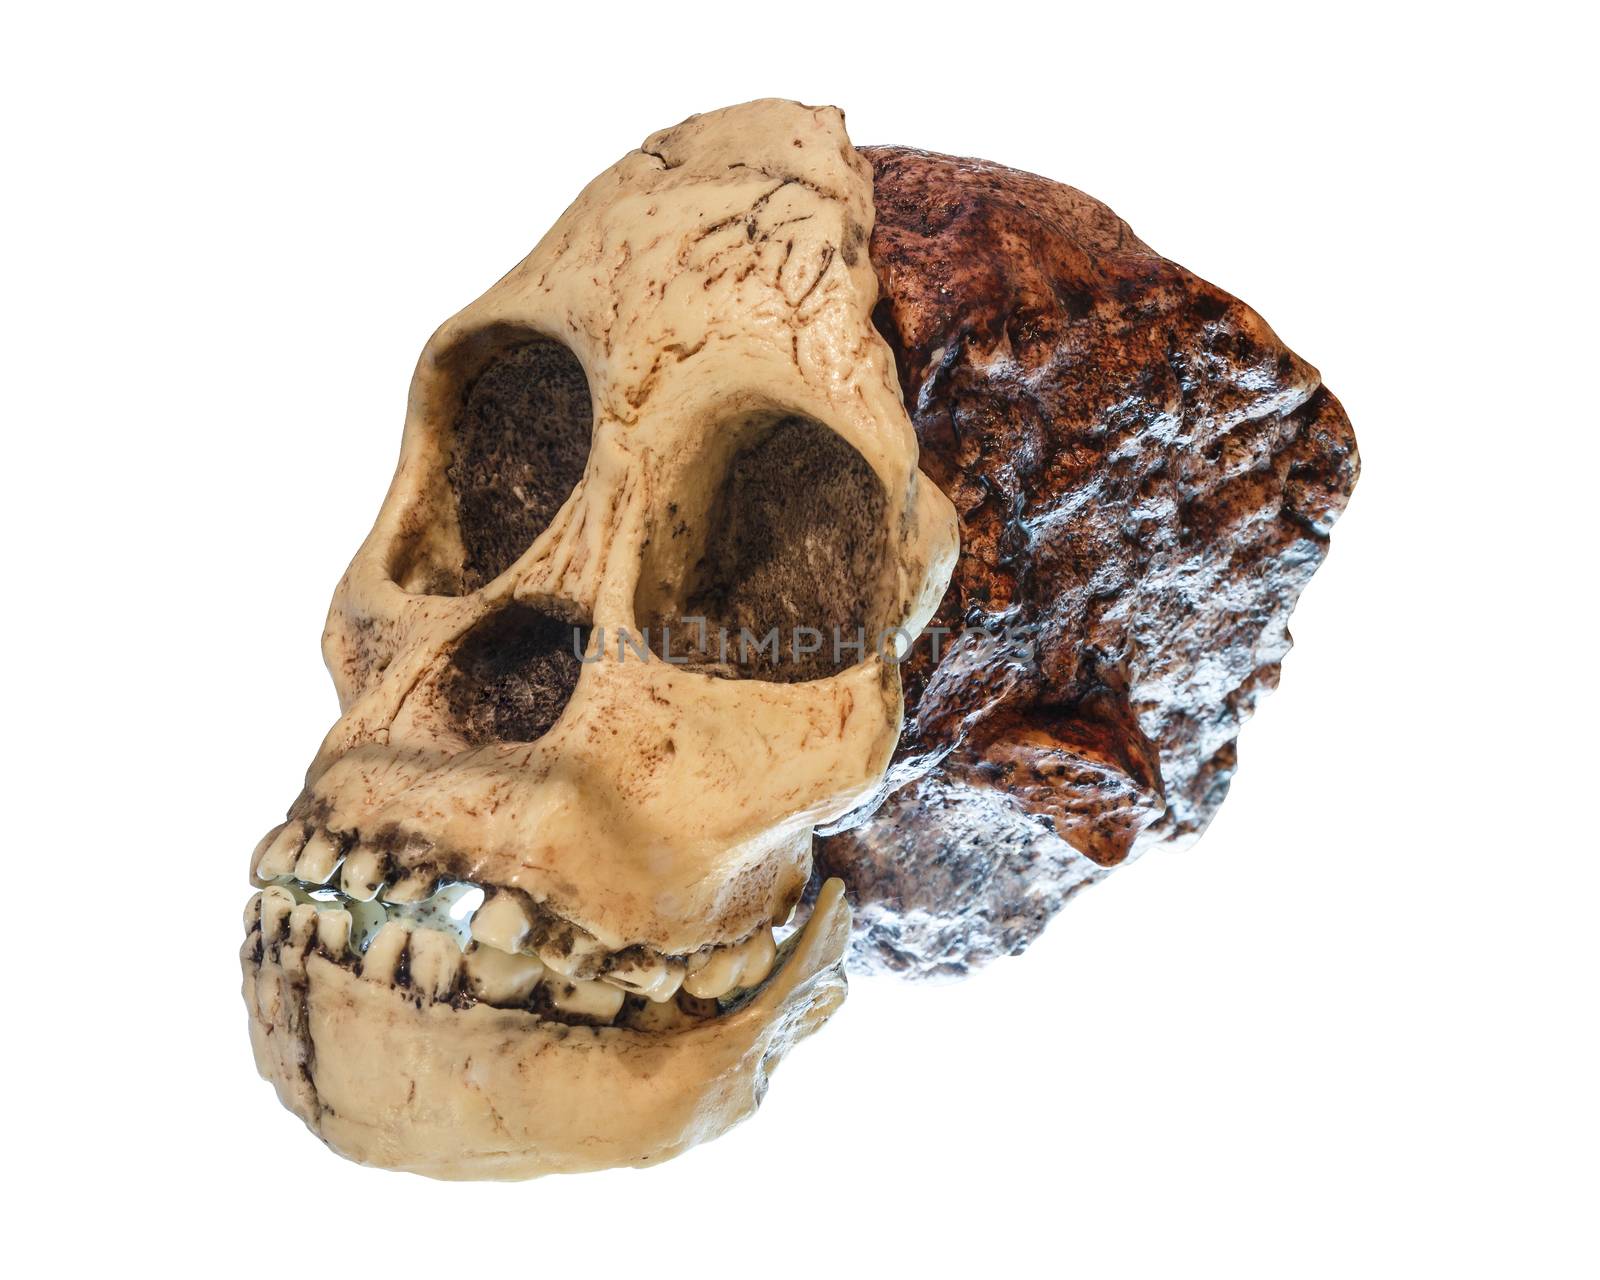 Australopithecus africanus Skull . ( Taung Child ) . Dated to 2.5 million years ago . Discovered in 1924 in a limestone quarry near Taung village , South africa .